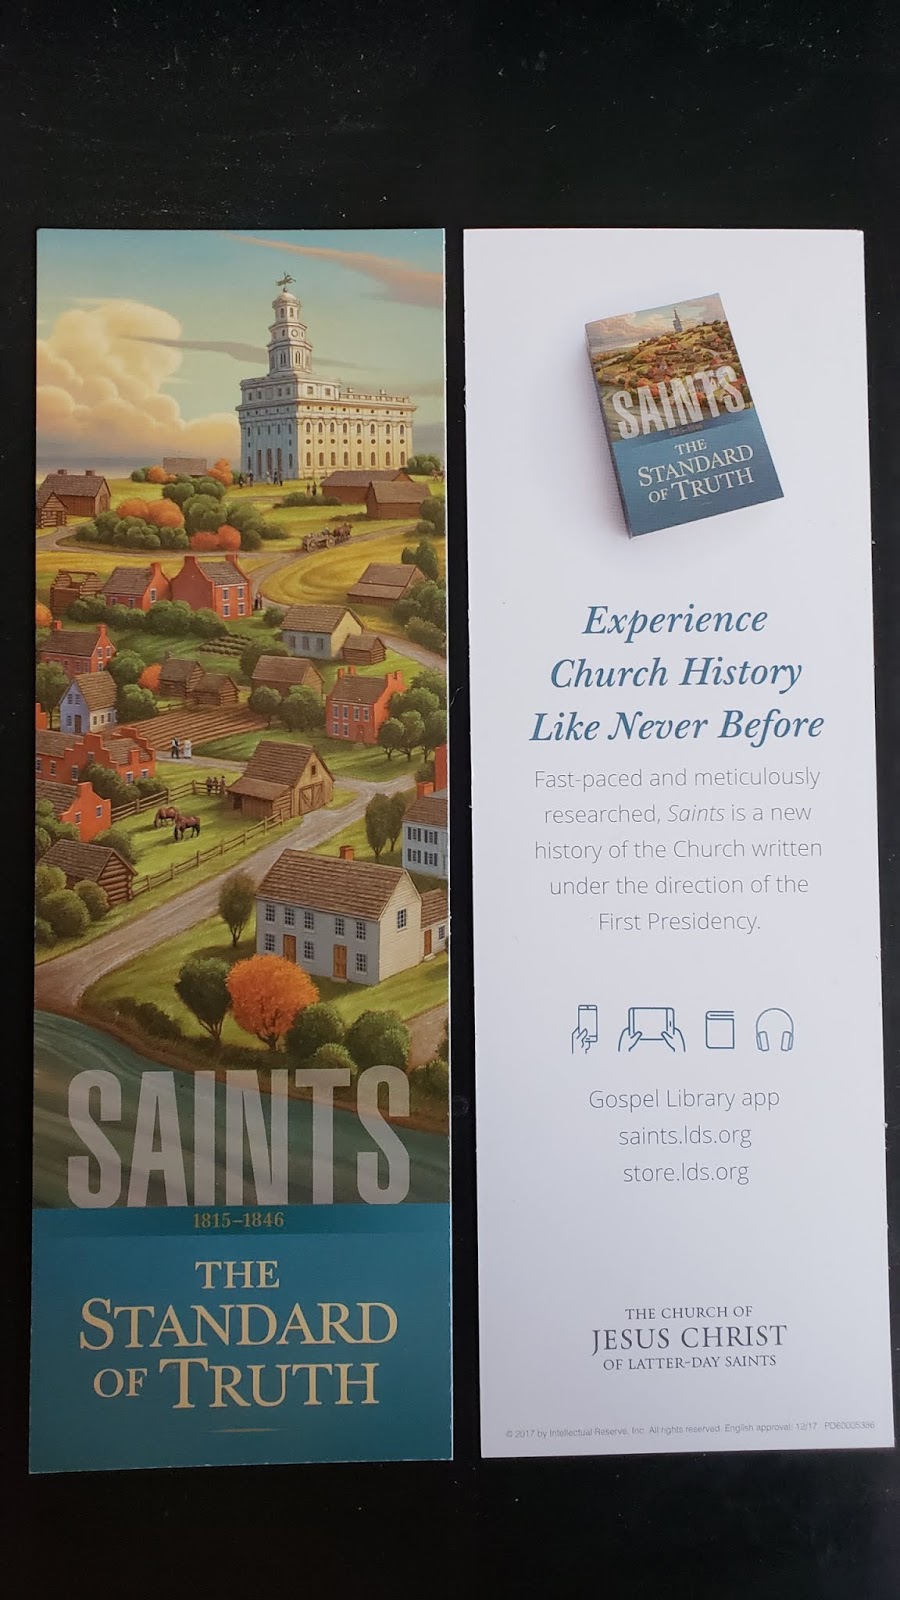 the book Saints needs revisions